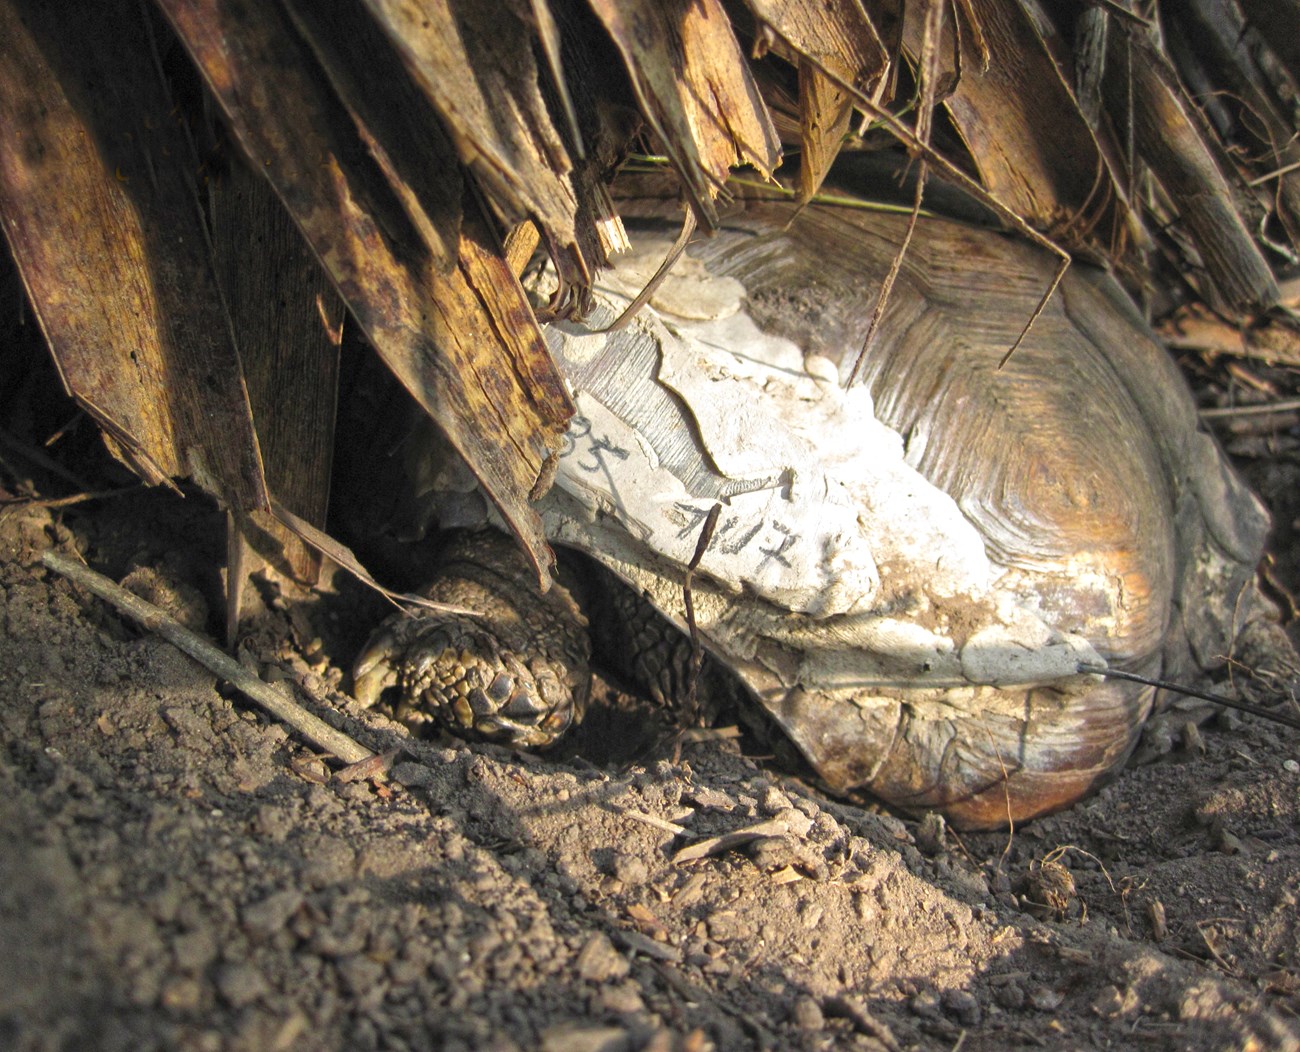 The rear end of a Texas tortoise, hidden under dead yucca leaves